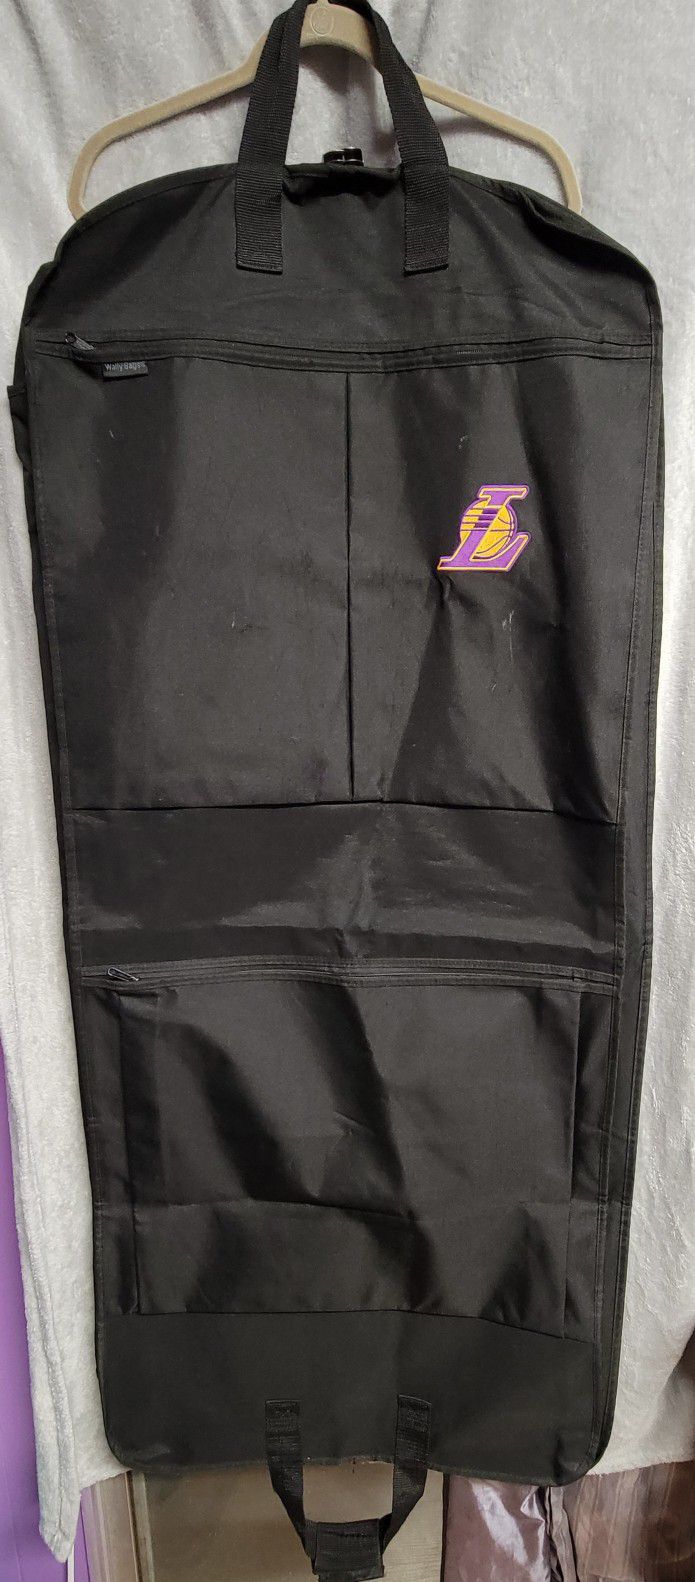 Wally Bags Travel Garment Bag with Pockets Black 52" Embroidered Lakers Logo